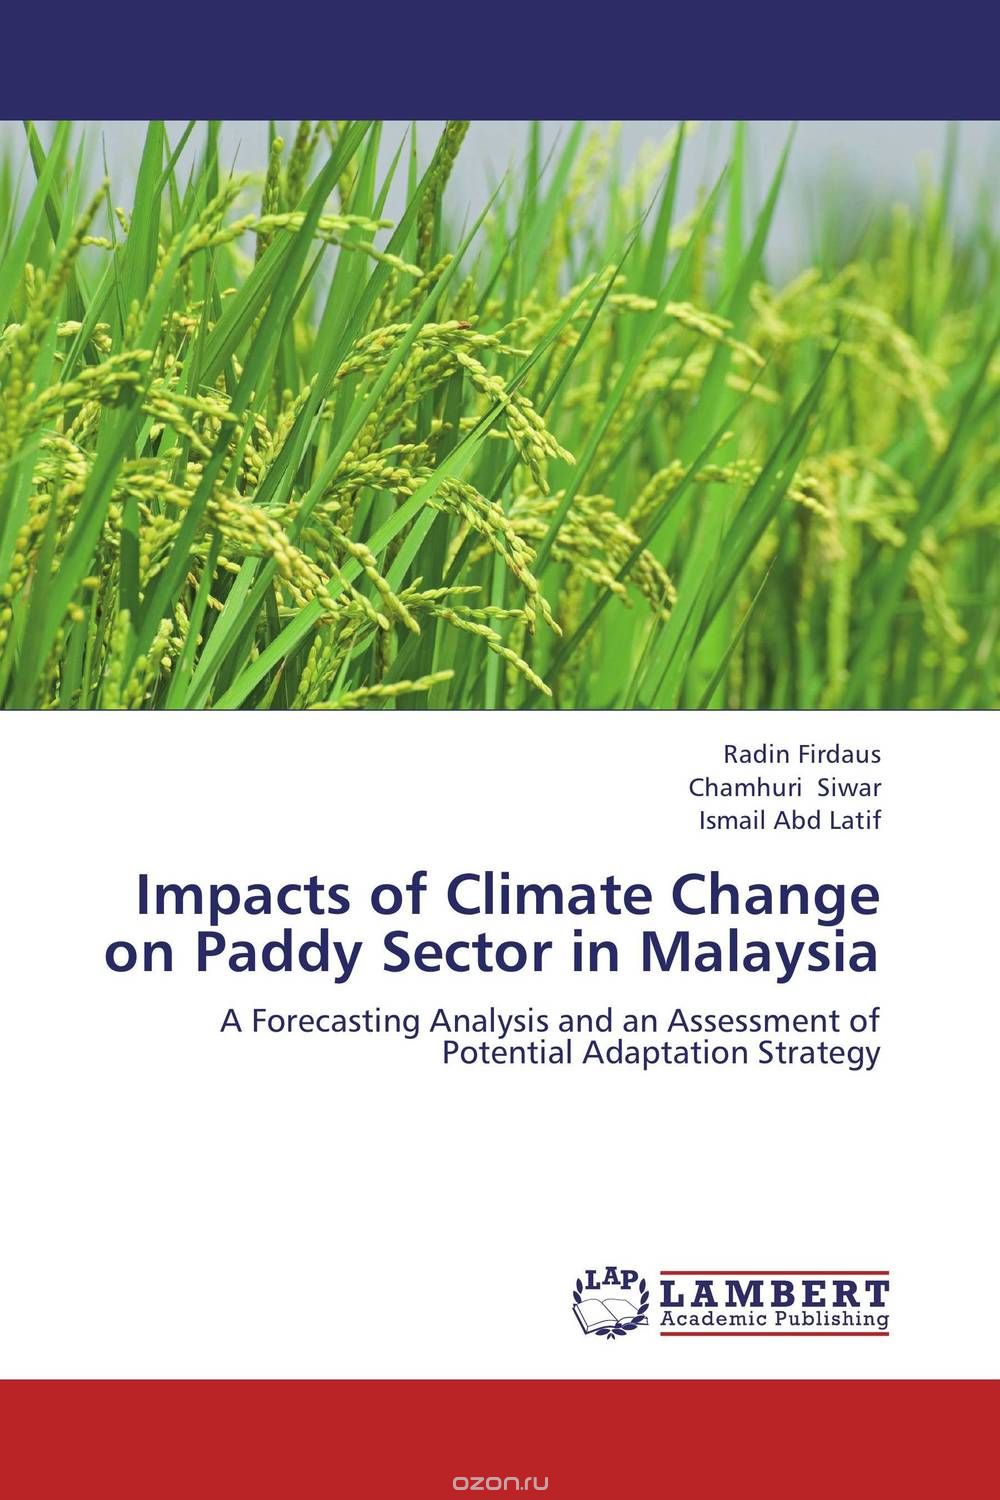 Скачать книгу "Impacts of Climate Change on Paddy Sector in Malaysia"